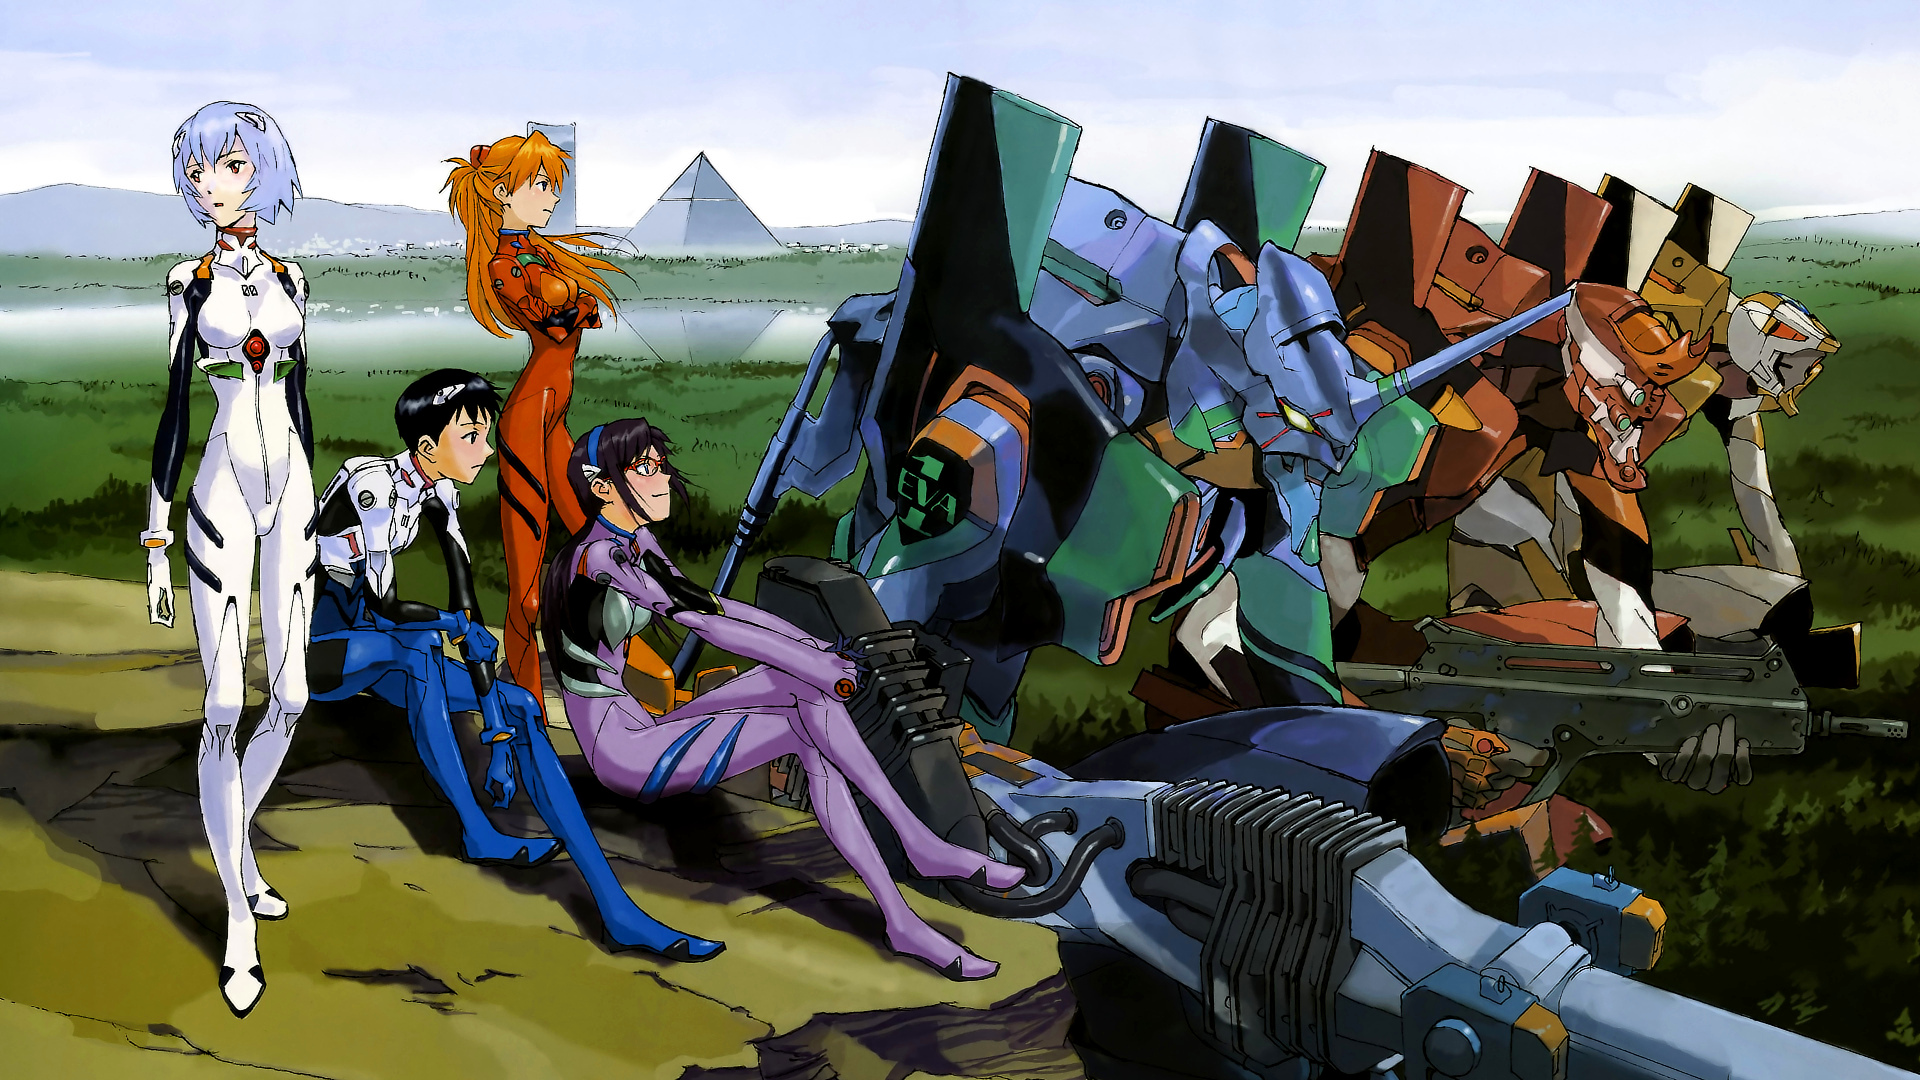 Evangelion: 2.0 You Can (Not) Advance Art